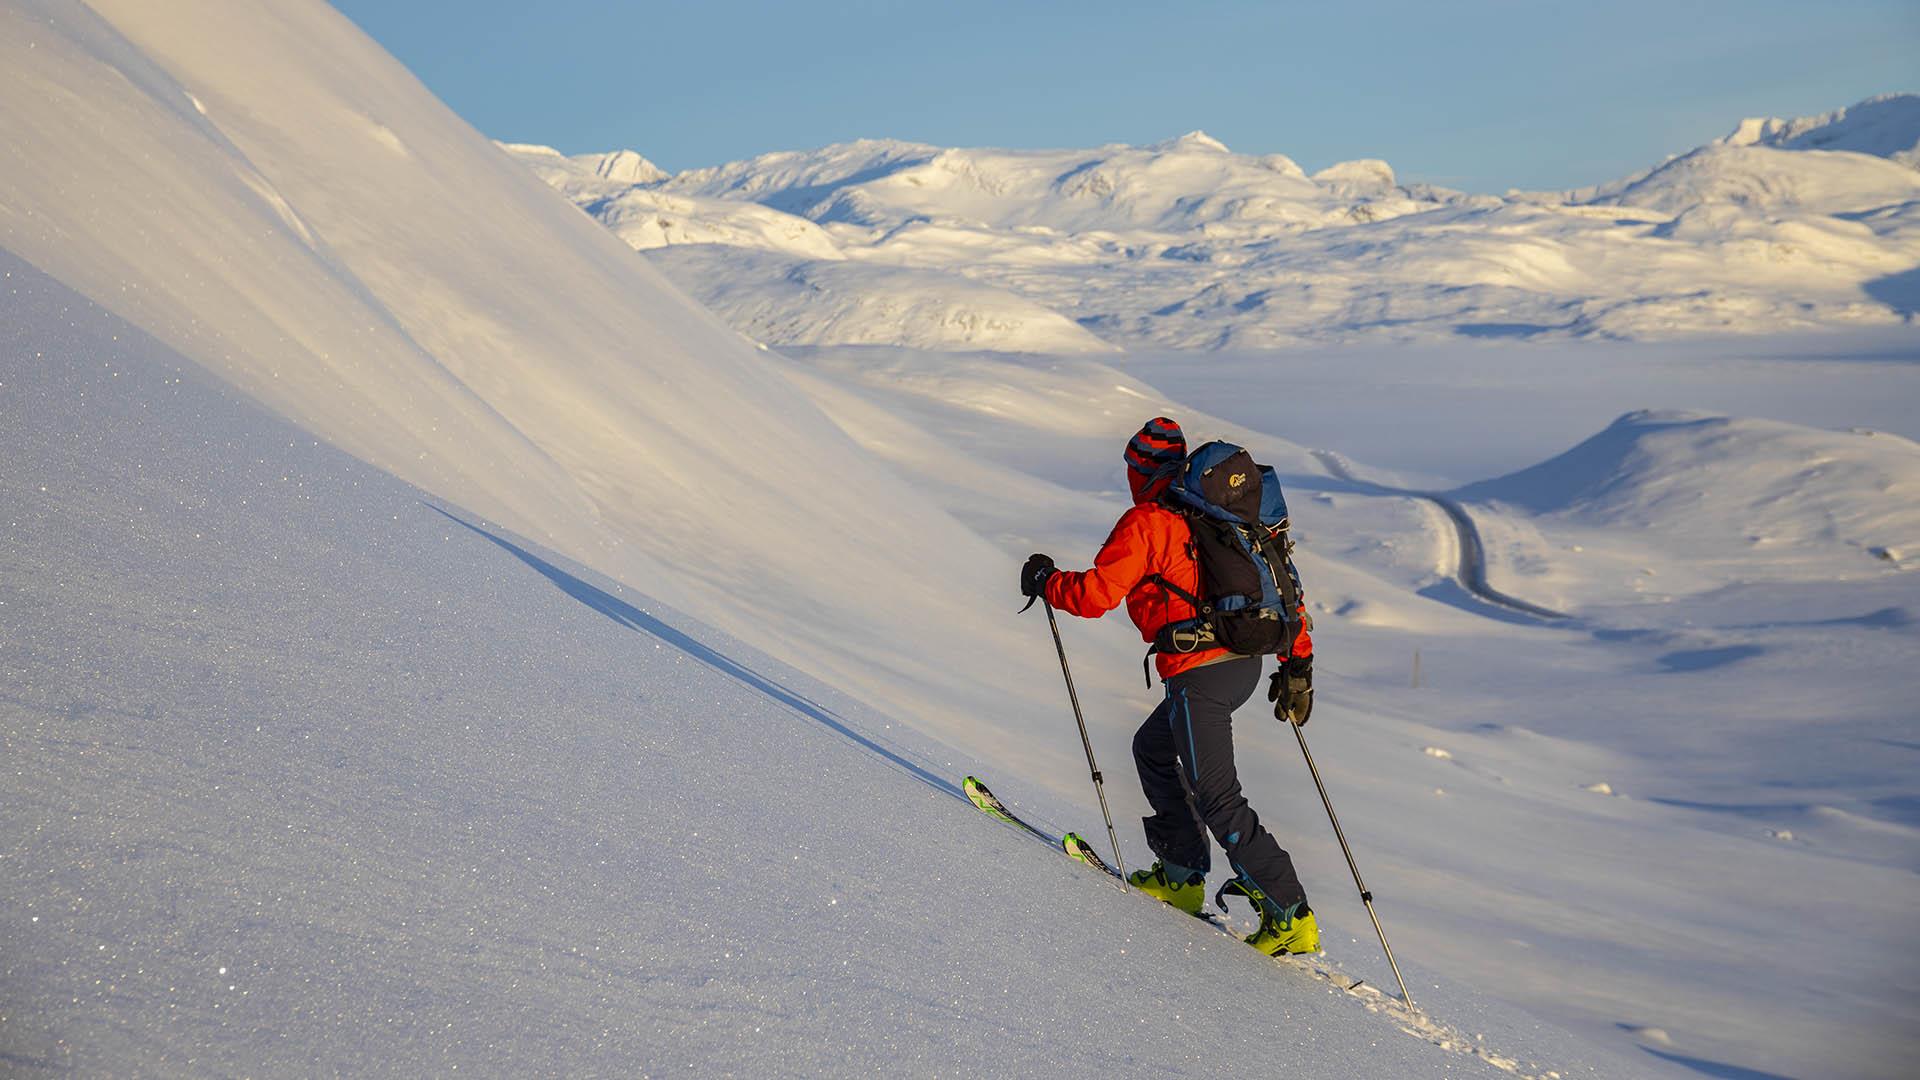 Person on the way upwards with randonee skis, great view over the snow covered mountain landscape.